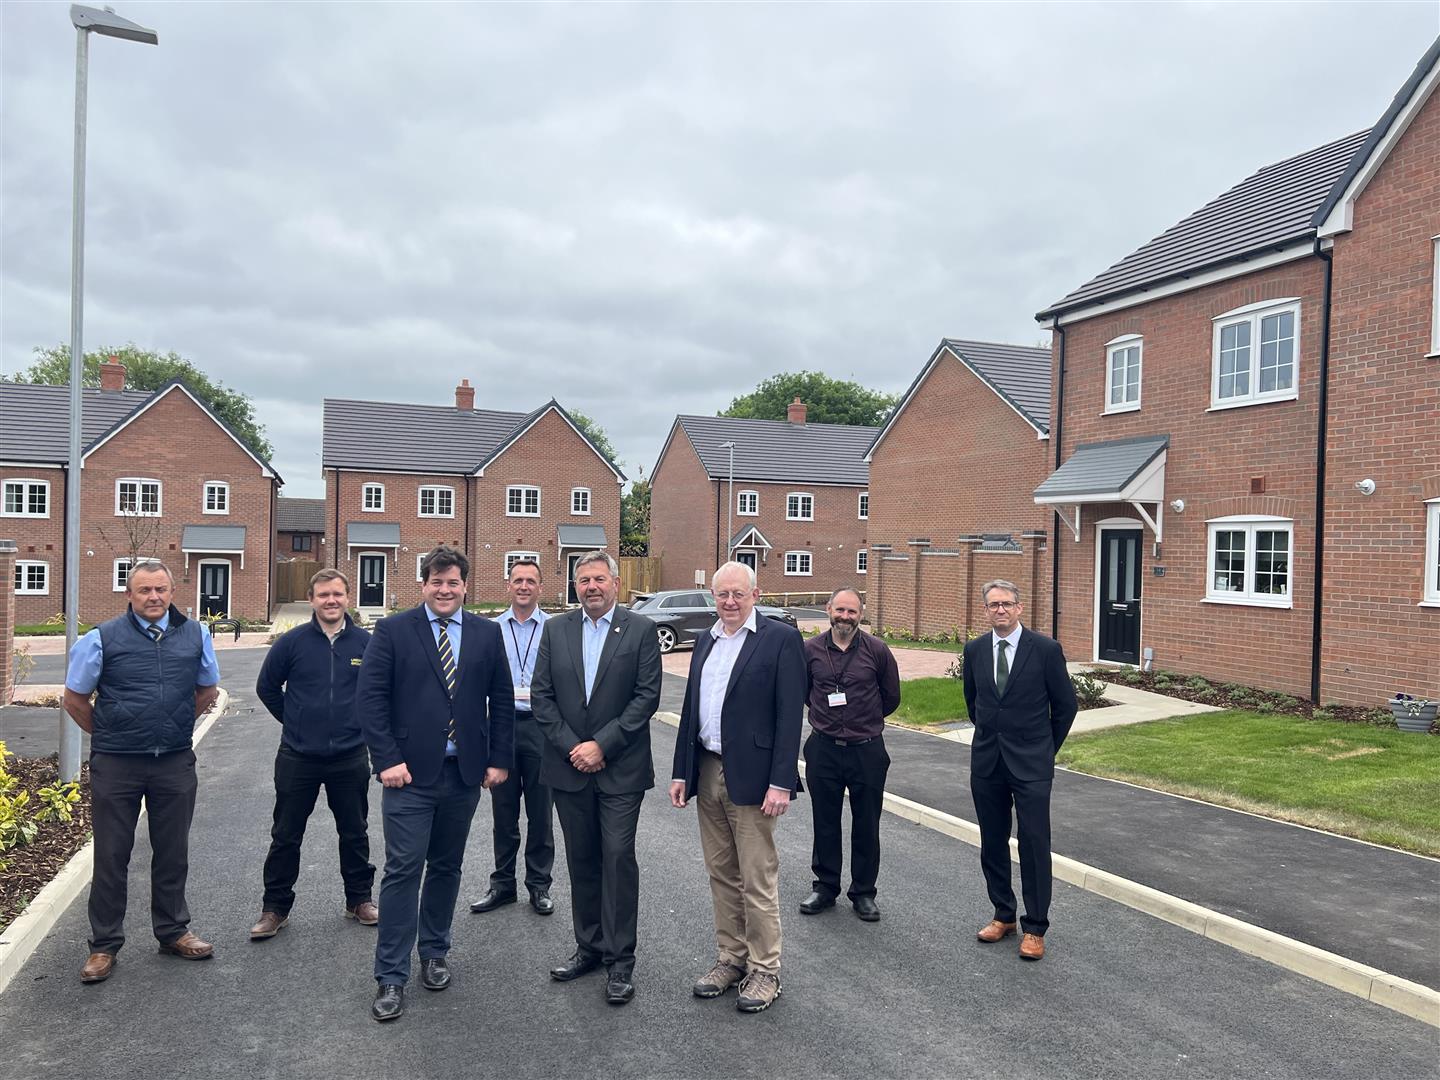 Land which formerly housed a depot has been transformed into 20 quality homes.